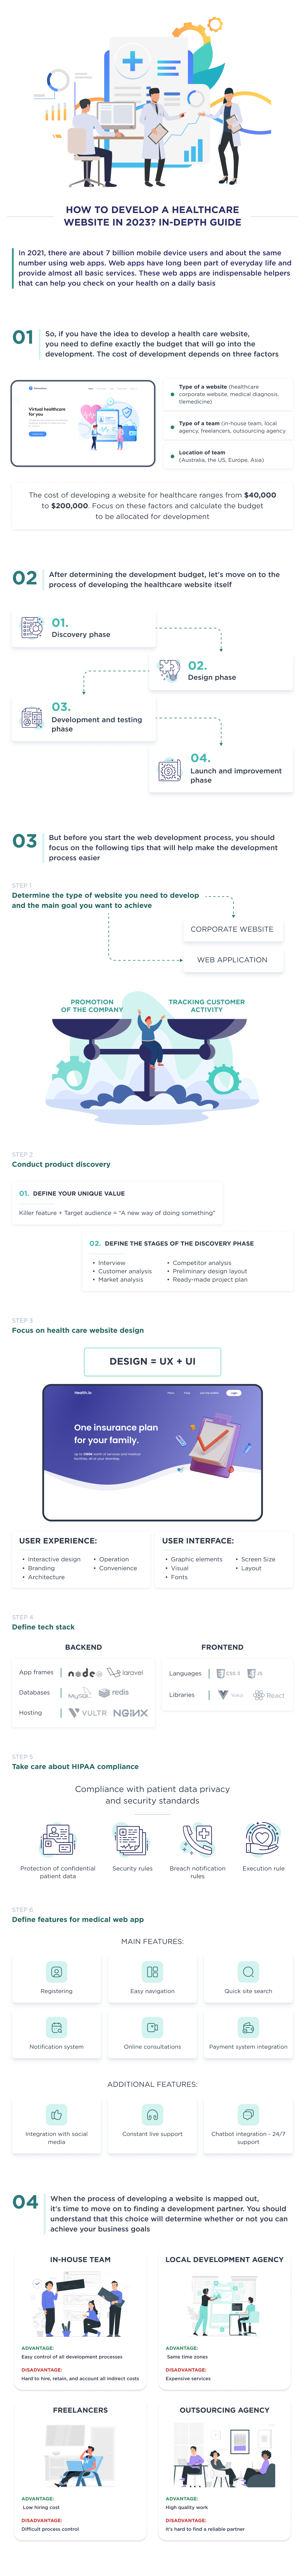 This infographic provides a step-by-step process for developing a healthcare website, detailing each component that affects development costs.